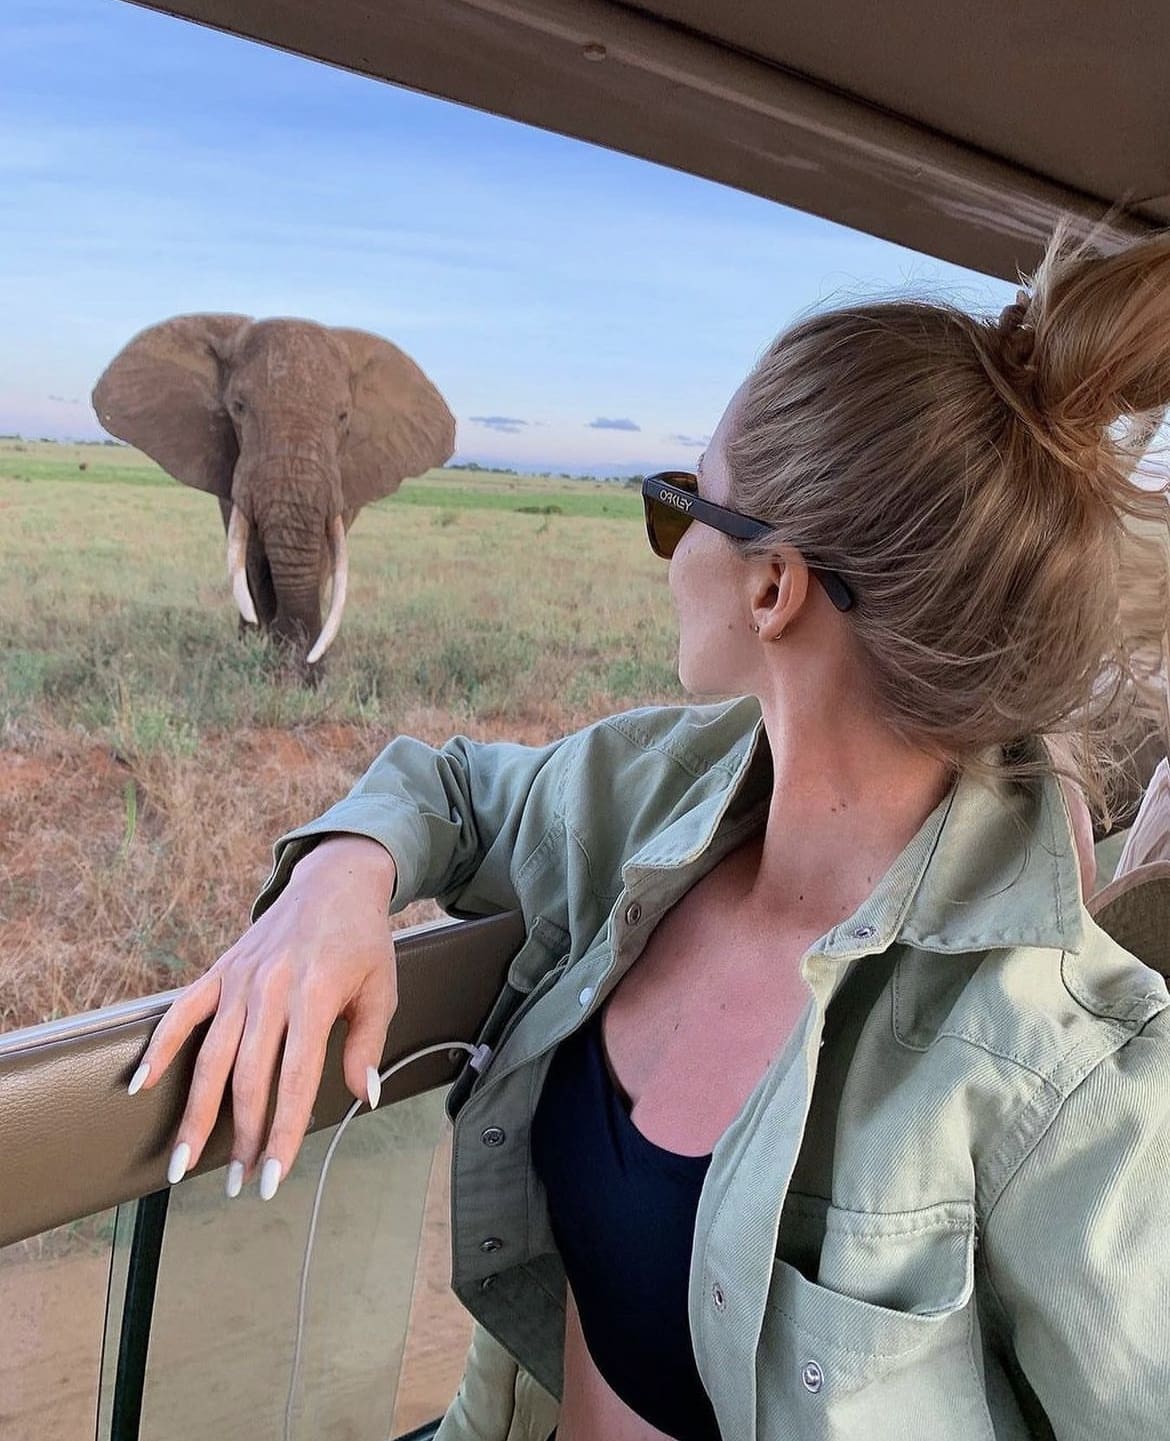 Viewing a large African elephant from a safari vehicle in Kenya